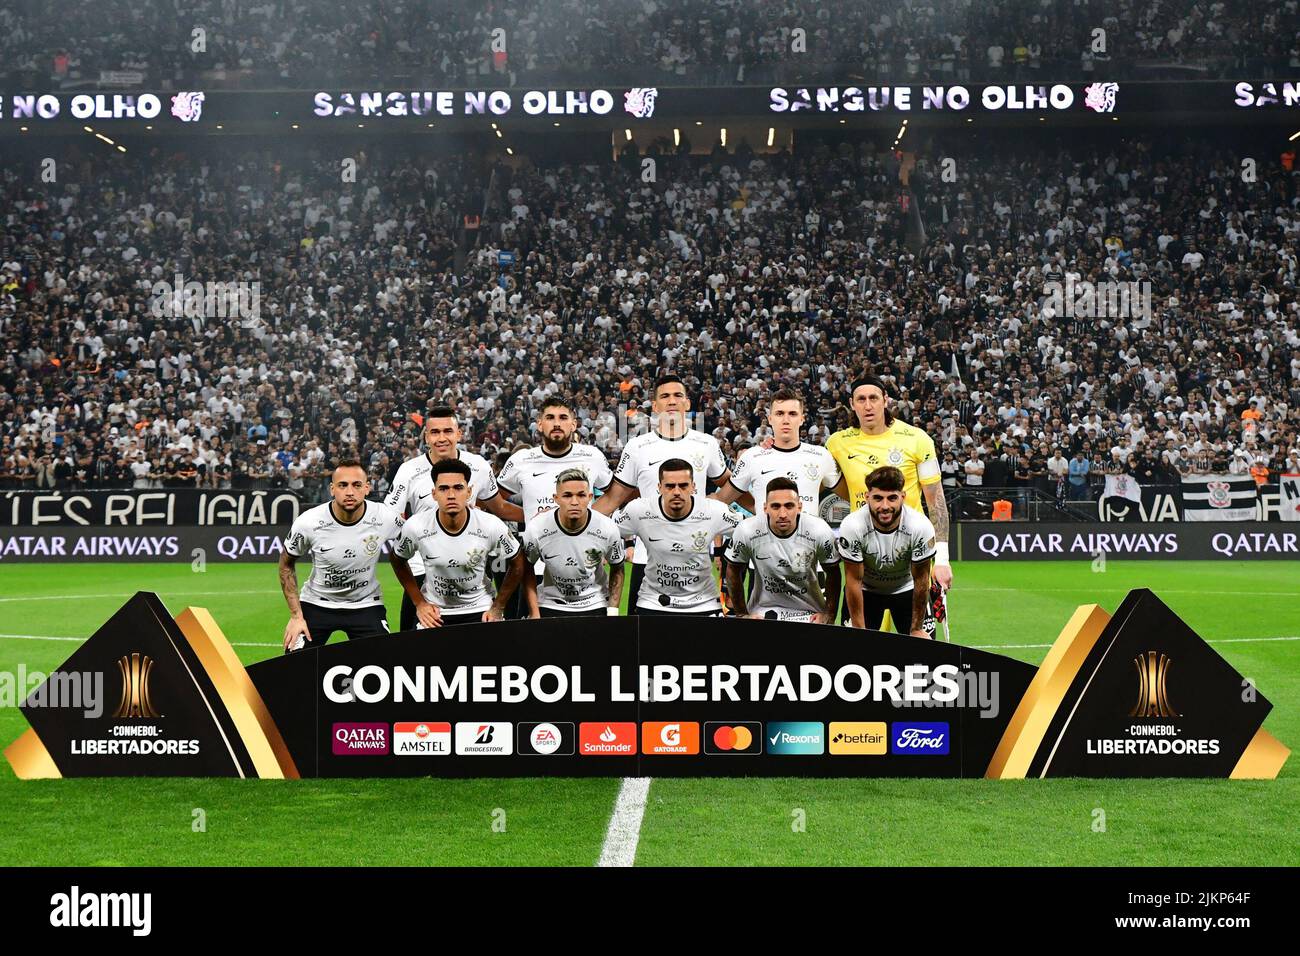 SÃO PAULO, BRAZIL - AUGUST 2: Match between Corinthians and Flamengo during Copa CONMEBOL Libertadores at Neo Química Arena on August 2, 2022 in São Paulo, BRAZIL. (Photo by Leandro Bernardes/PxImages) Credit: Px Images/Alamy Live News Stock Photo